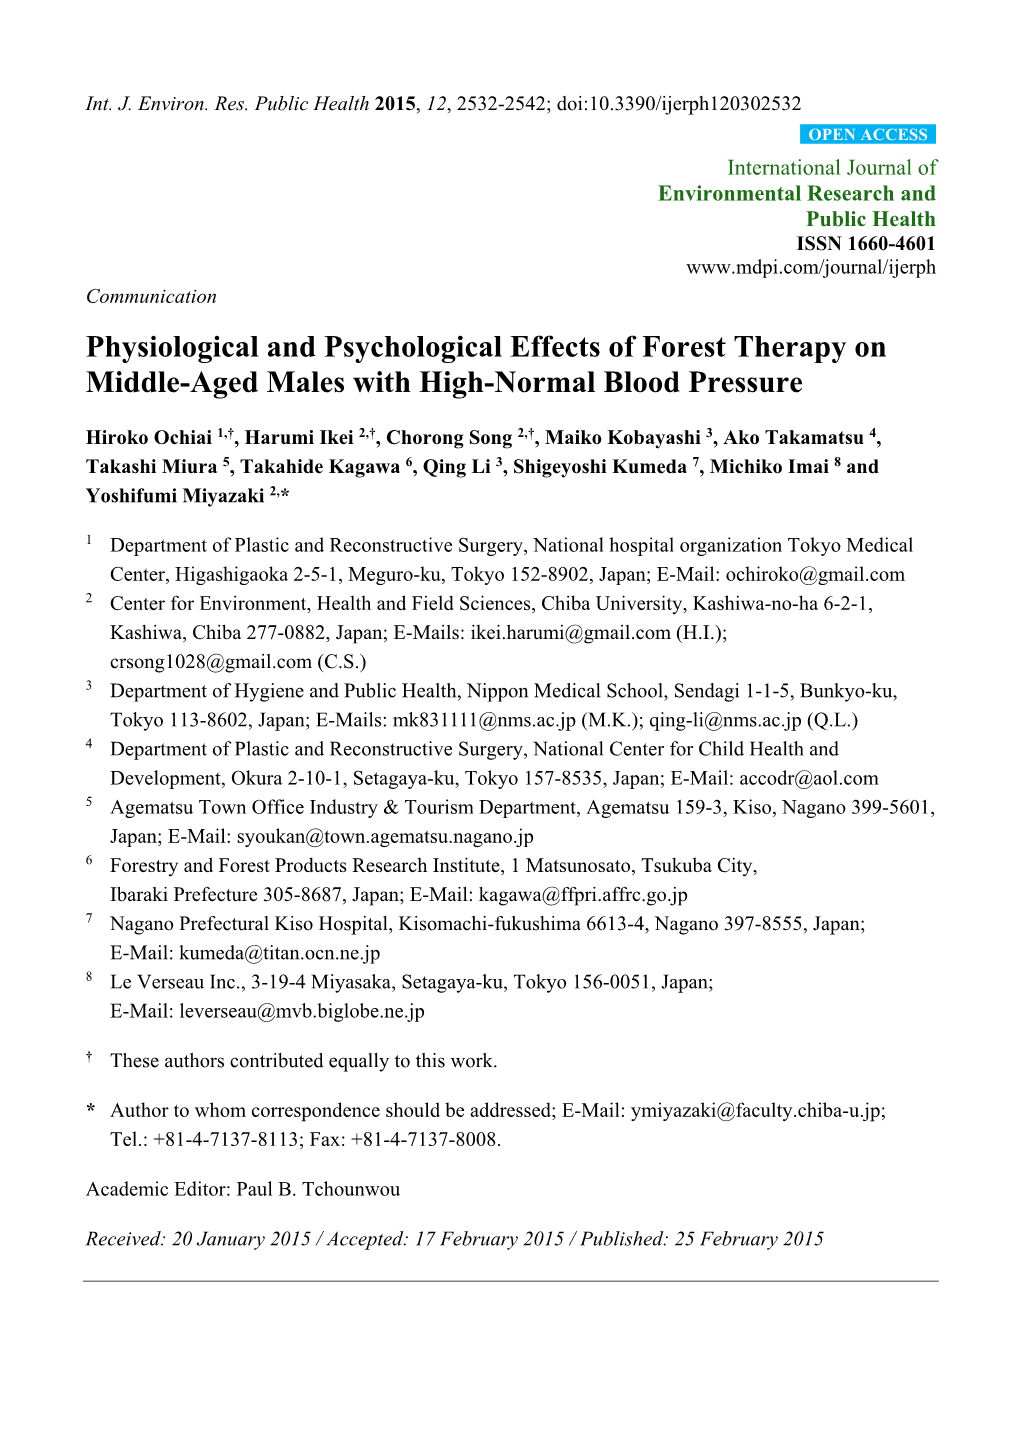 Physiological and Psychological Effects of Forest Therapy on Middle-Aged Males with High-Normal Blood Pressure